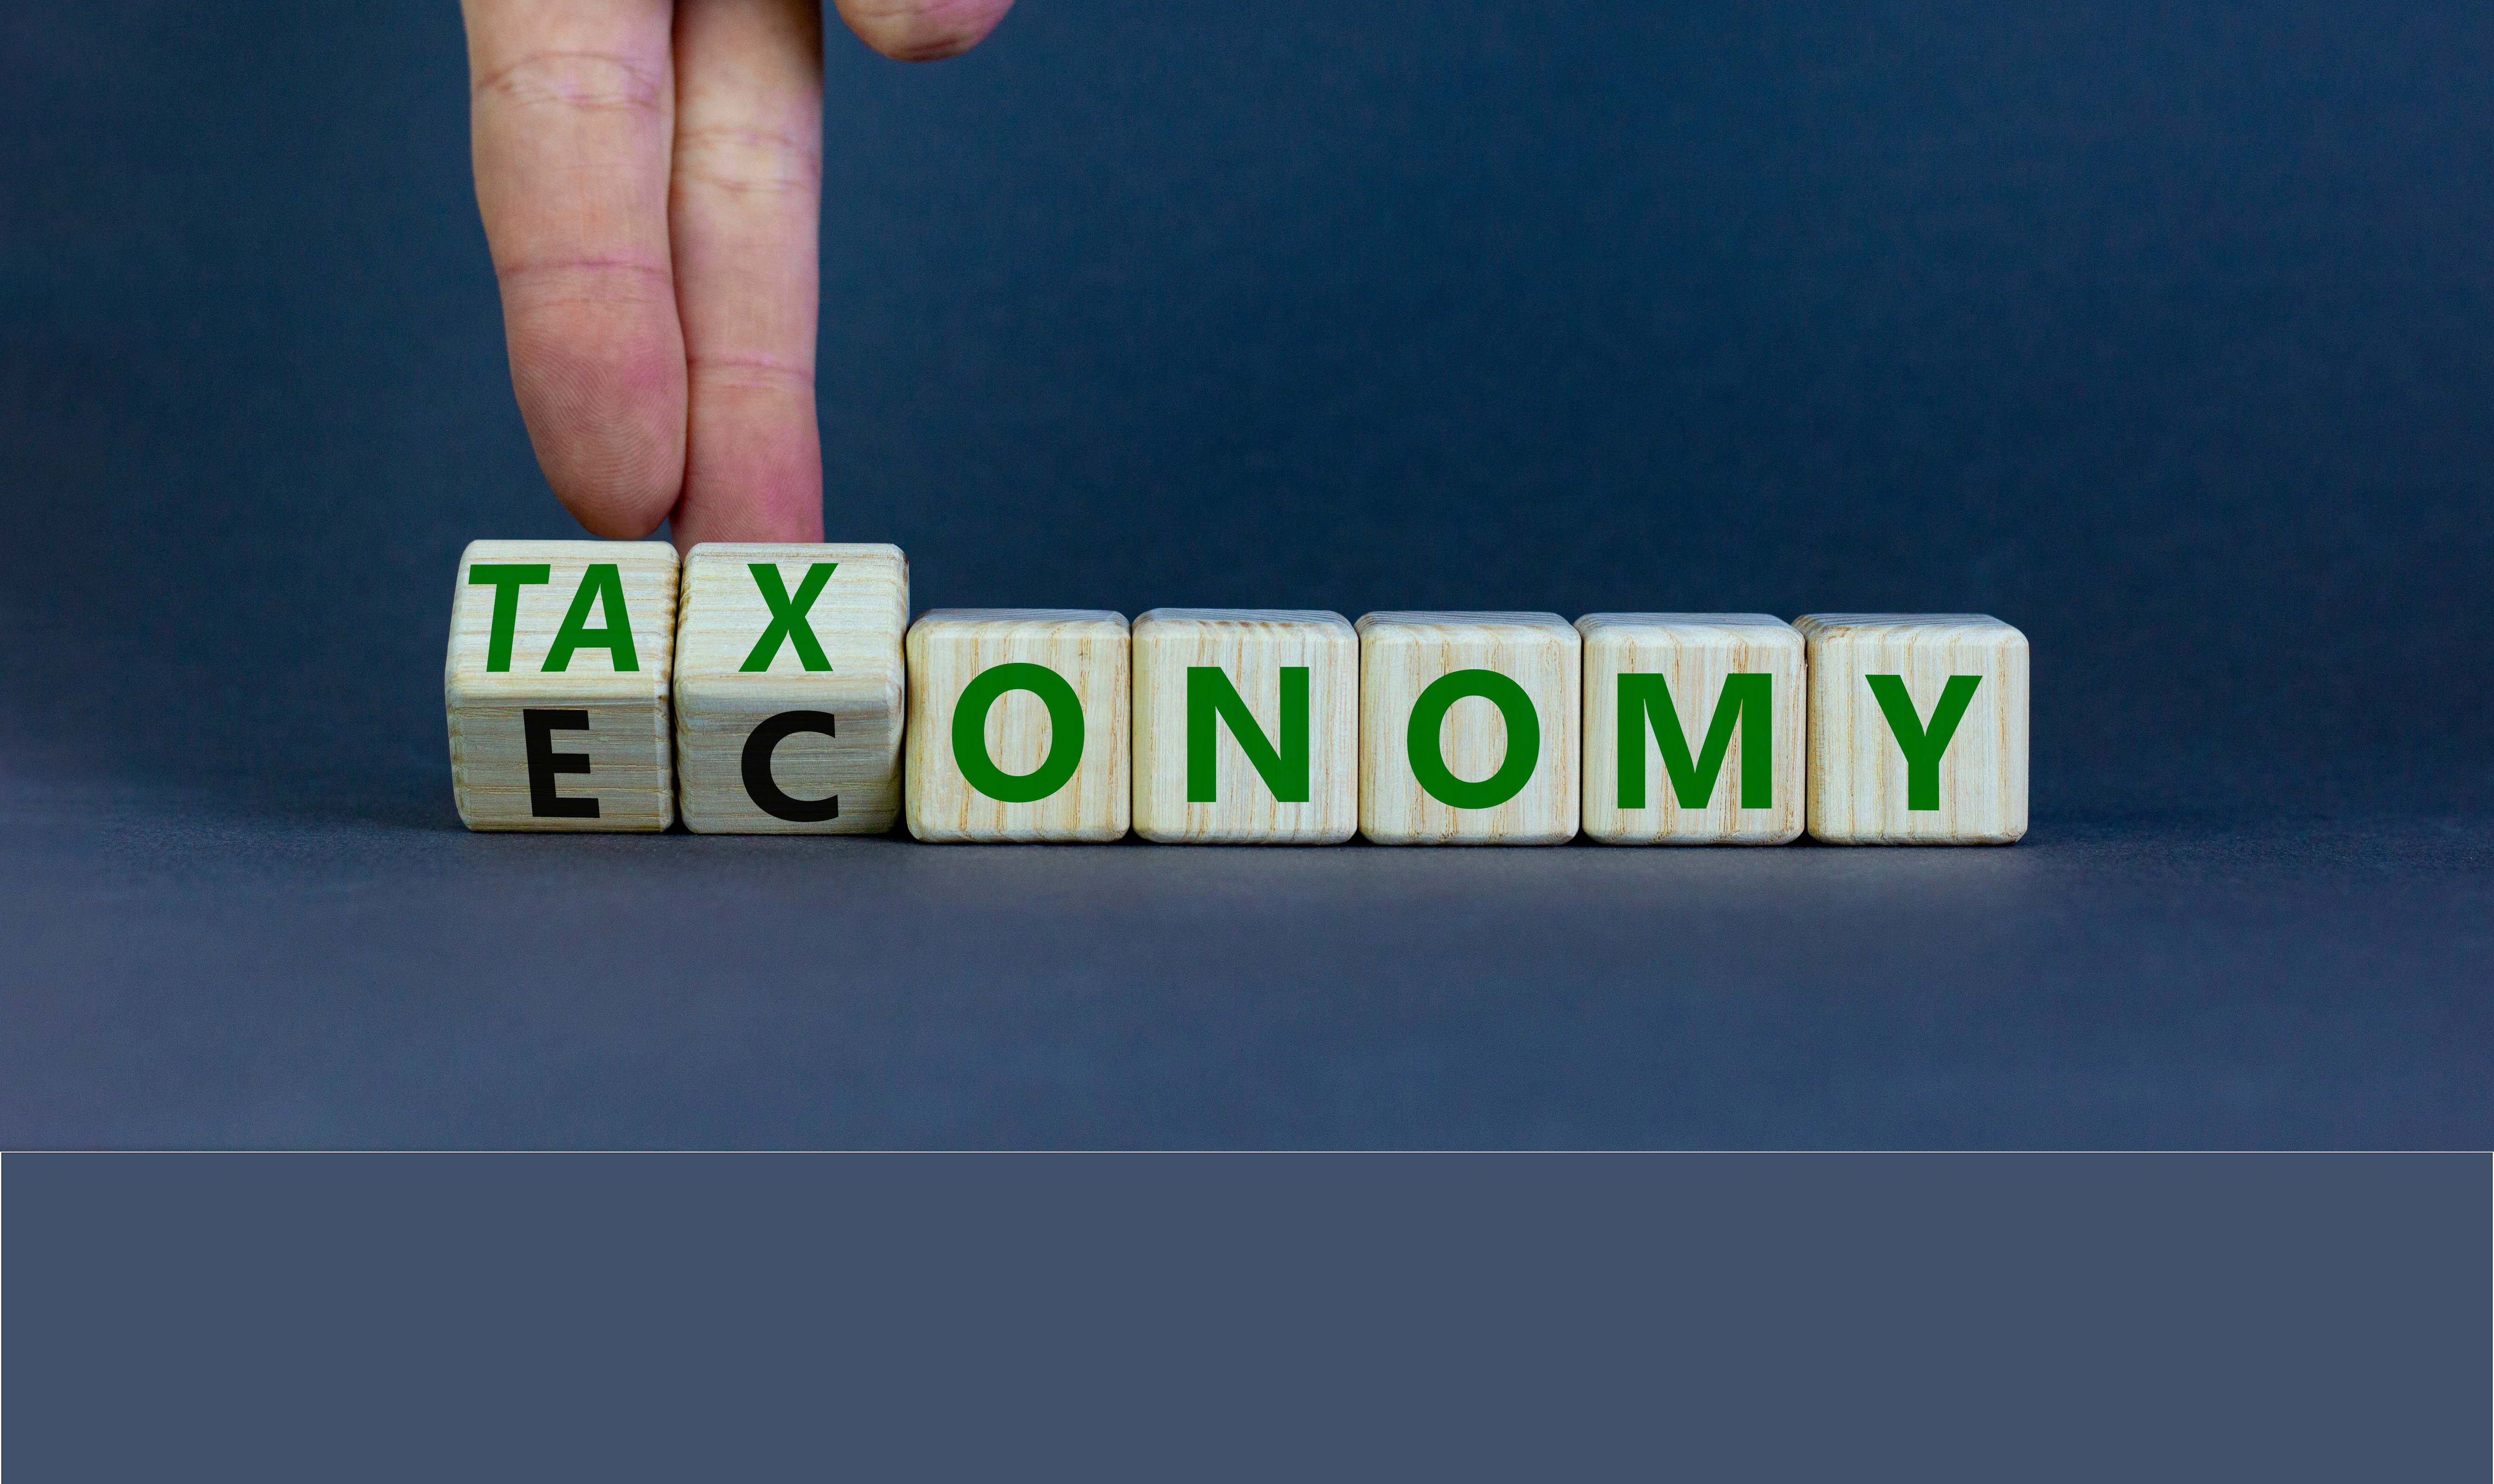 EU disappoints on green taxonomy